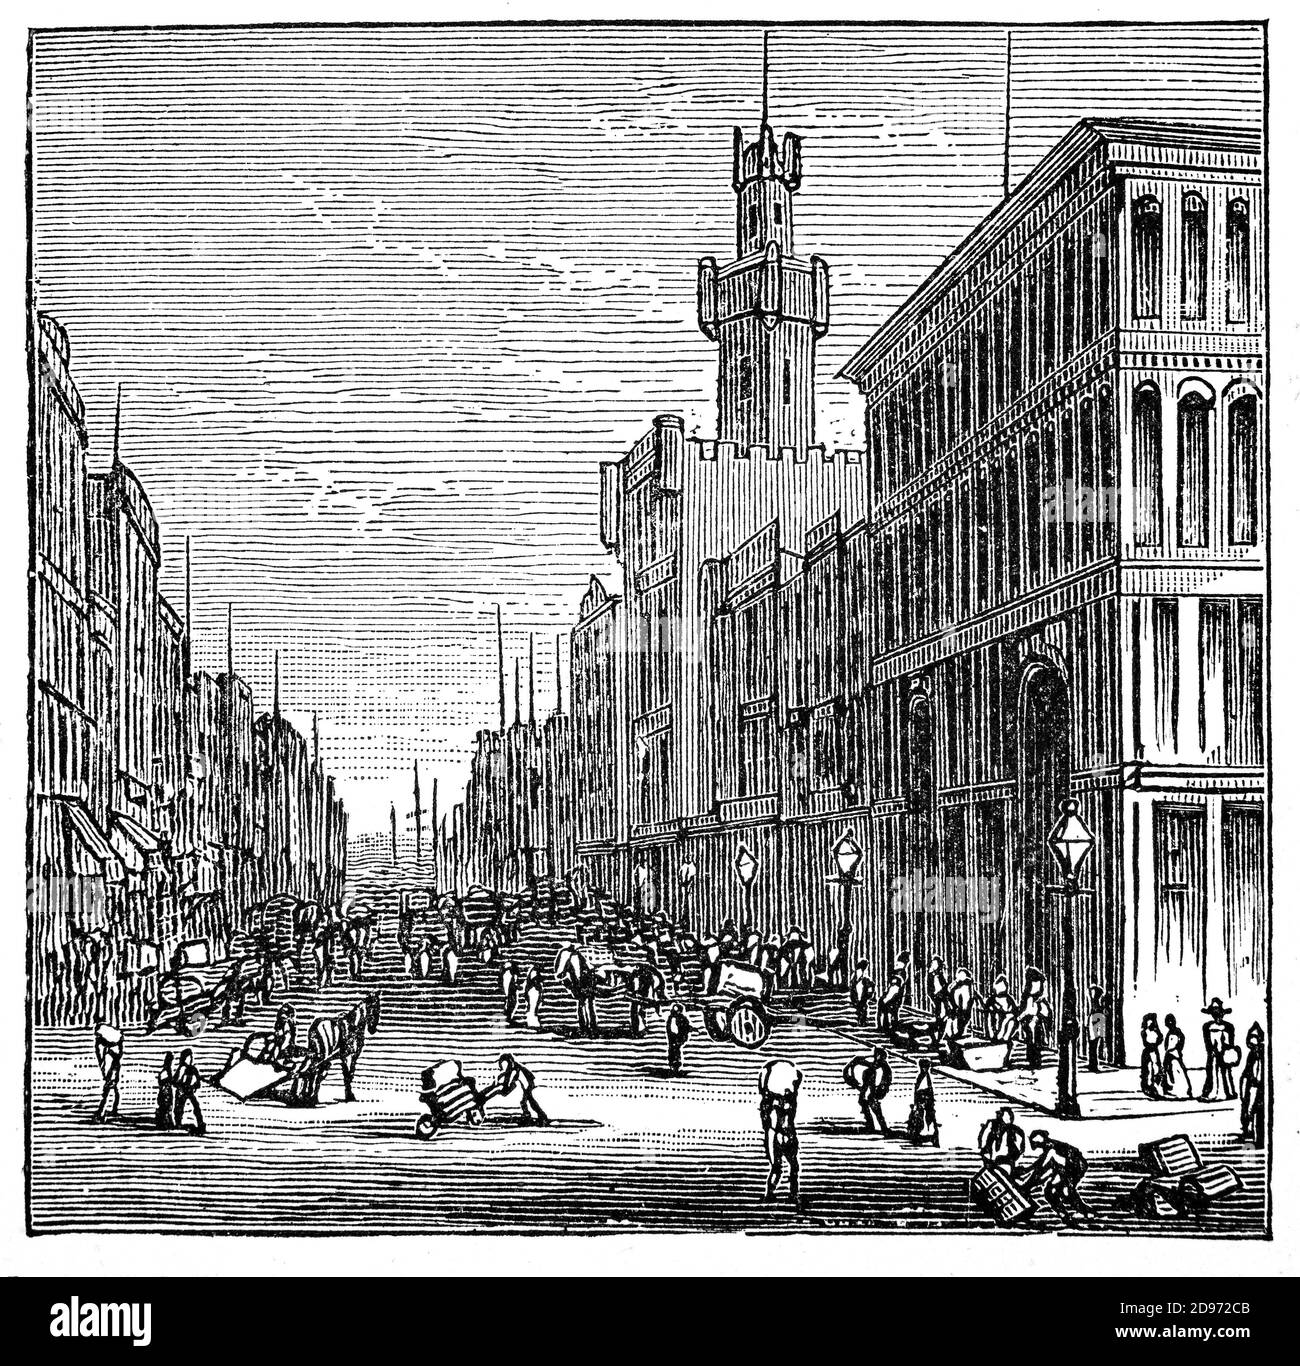 A late 19th Century view of Market Street, originally known as High Street, in Philadelphia, Pennsylvania. Market Street has been called the most historic highway in the United States: many of Benjamin Franklin's activities were centered along Market Street; Thomas Jefferson wrote the Declaration of Independence in a boarding house;  The mansion of Robert Morris, financier of the American Revolution, known as the President's House, was used by George Washington and John Adams as their residence during their terms as President. It is still one of the principal locations of business and commerce Stock Photo